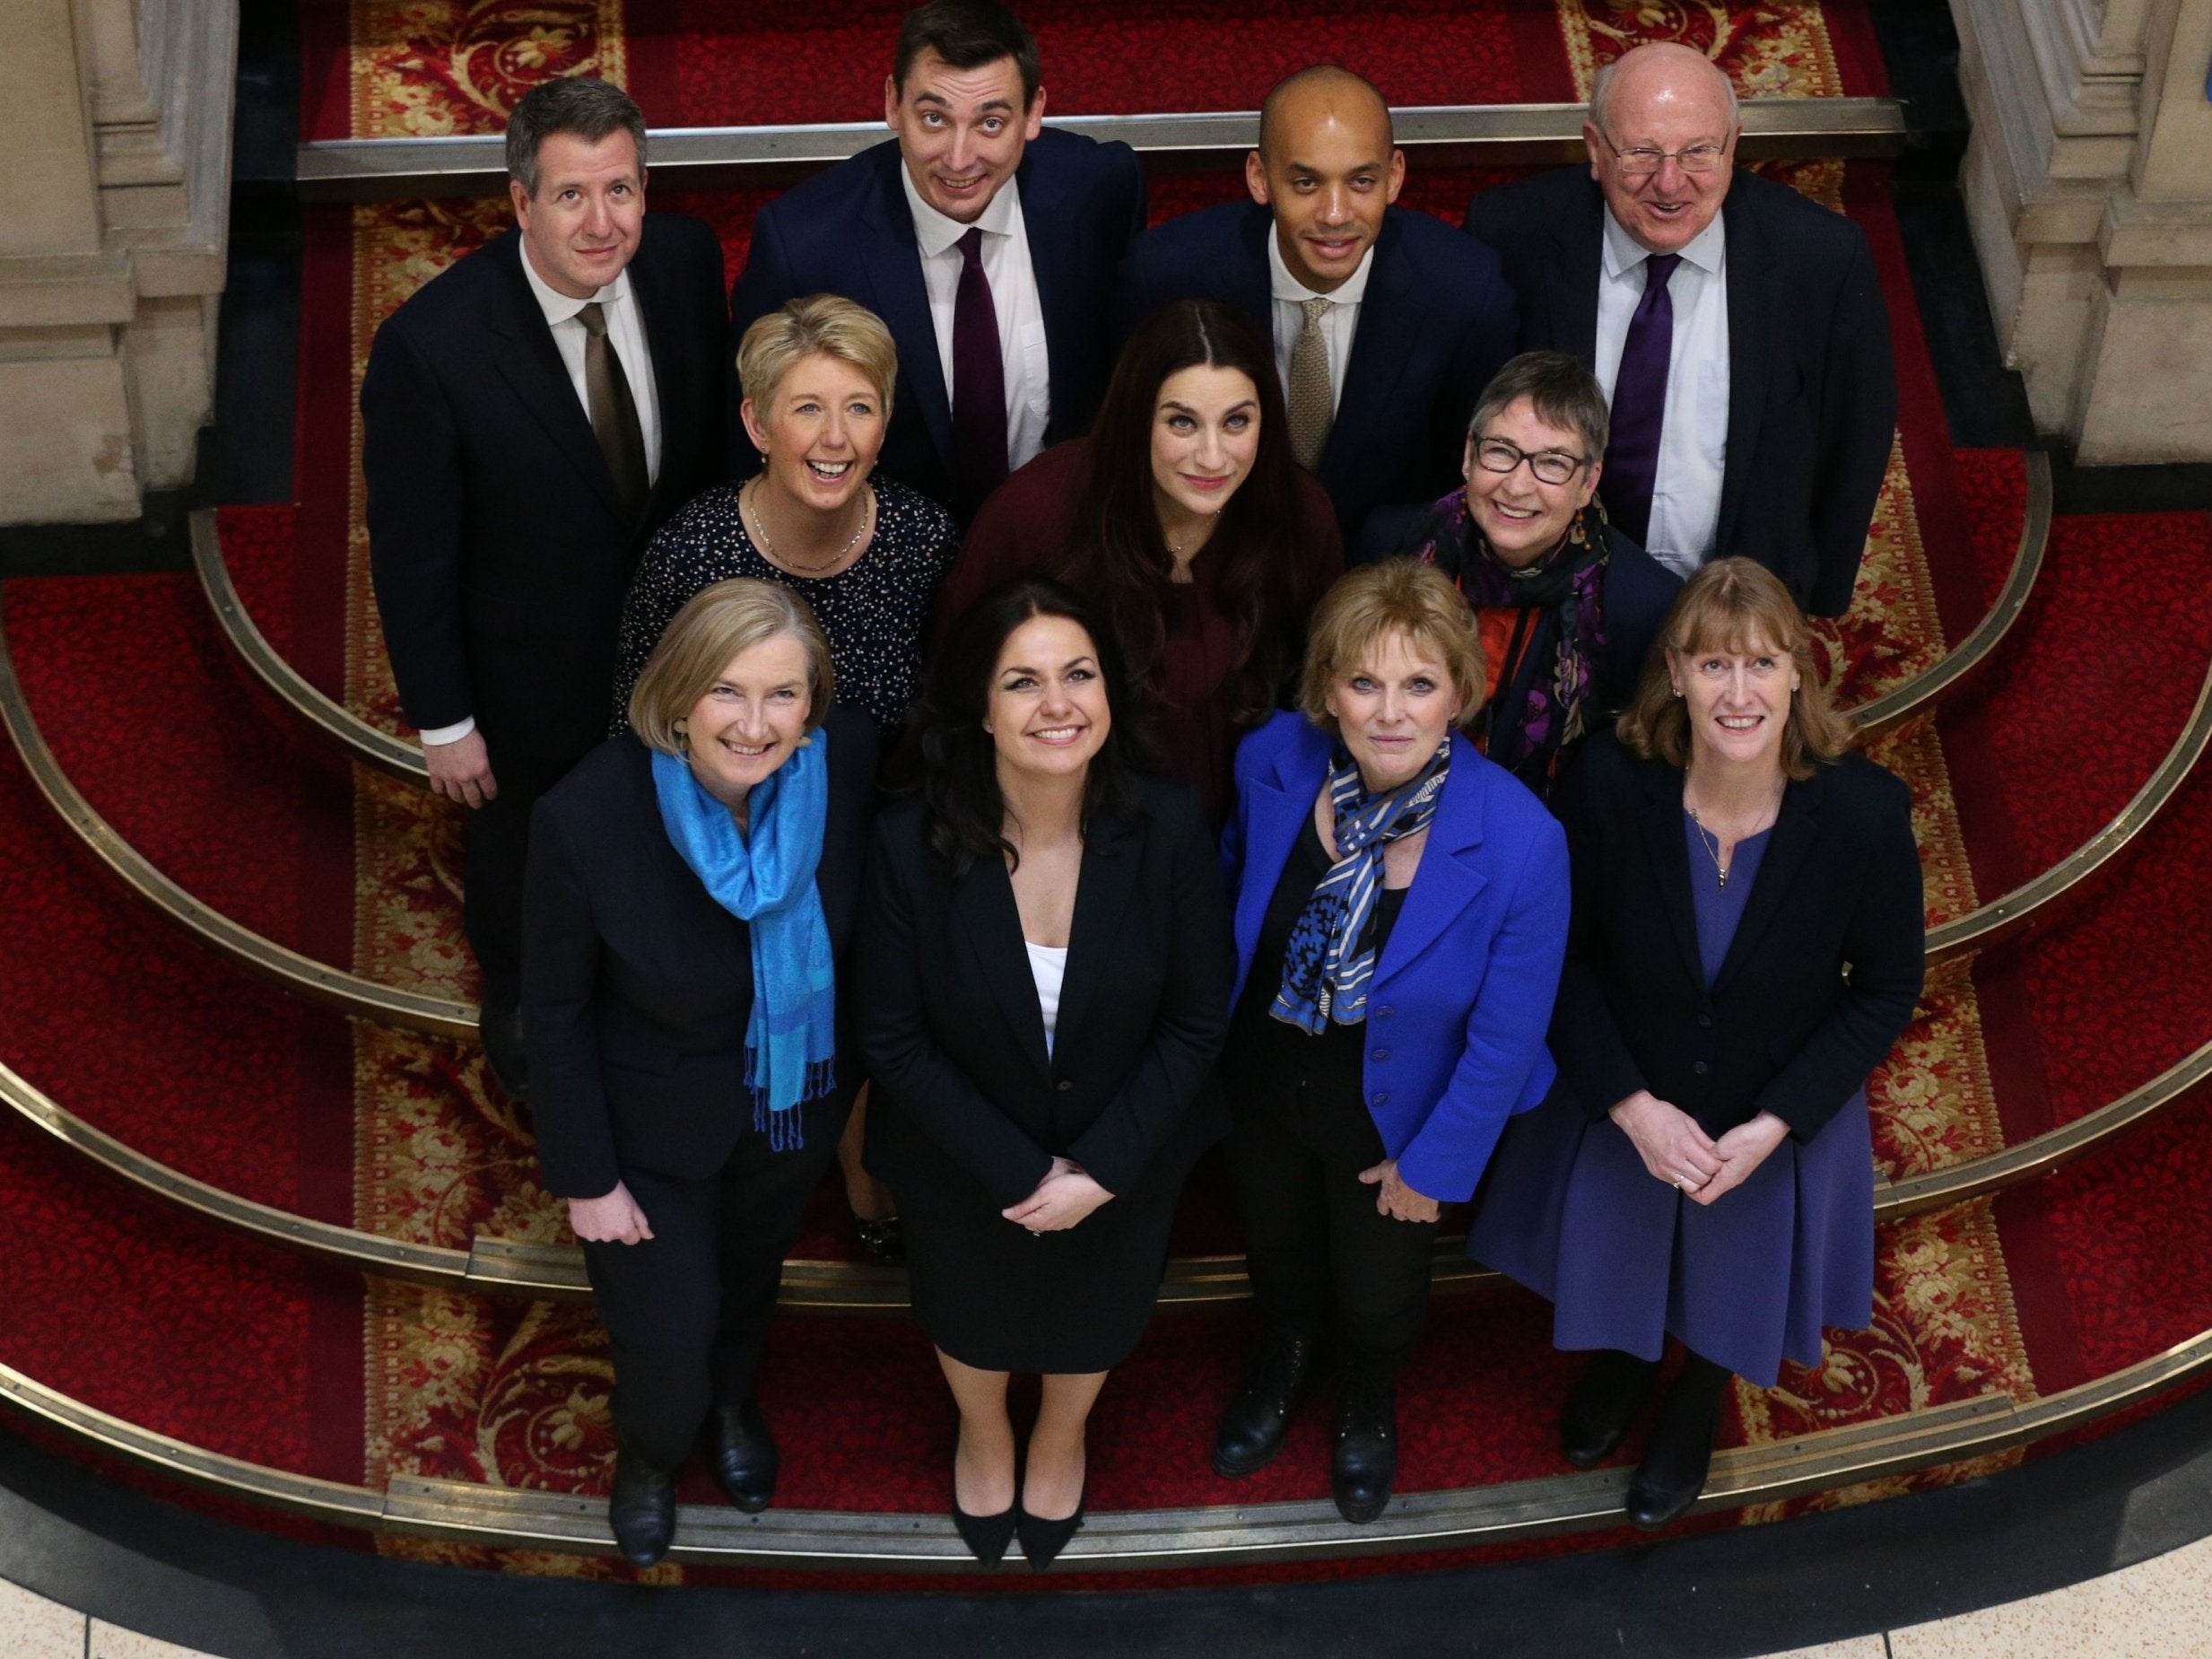 Sarah Wollaston (front left) was among 11 MPs who quit their parties to form the Change UK group in 2019